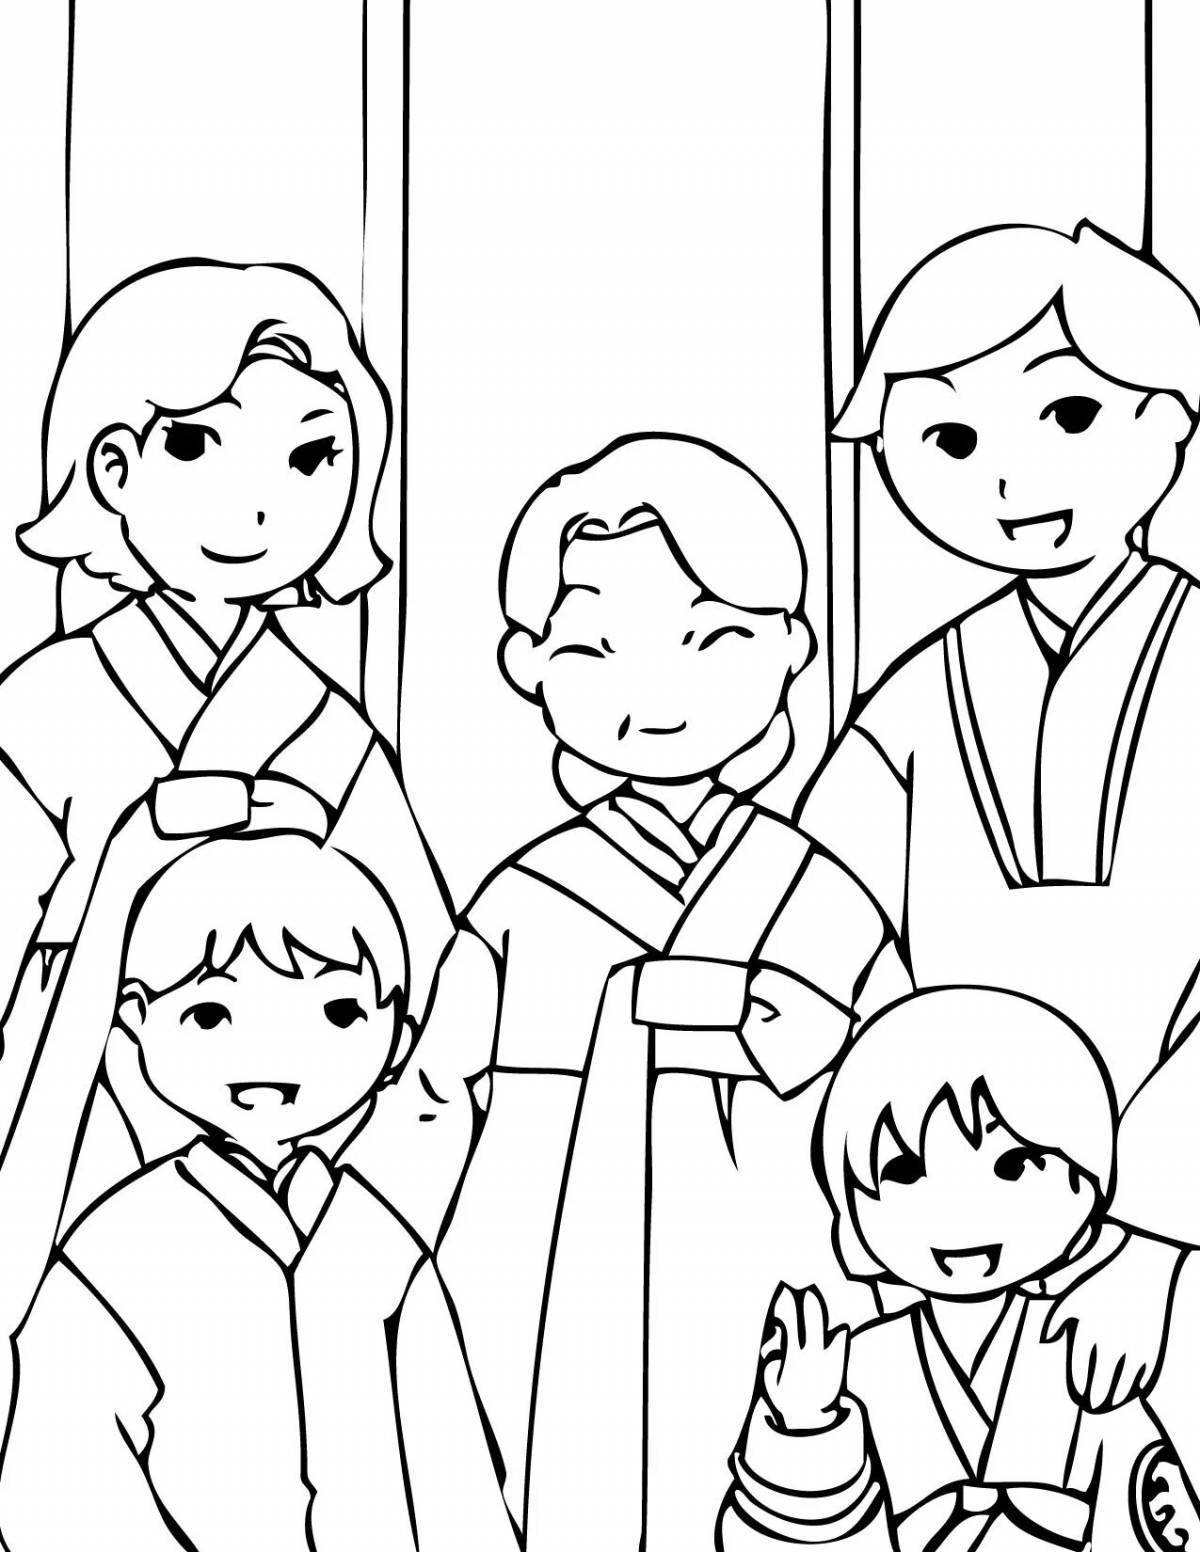 Colorful Koreans coloring pages